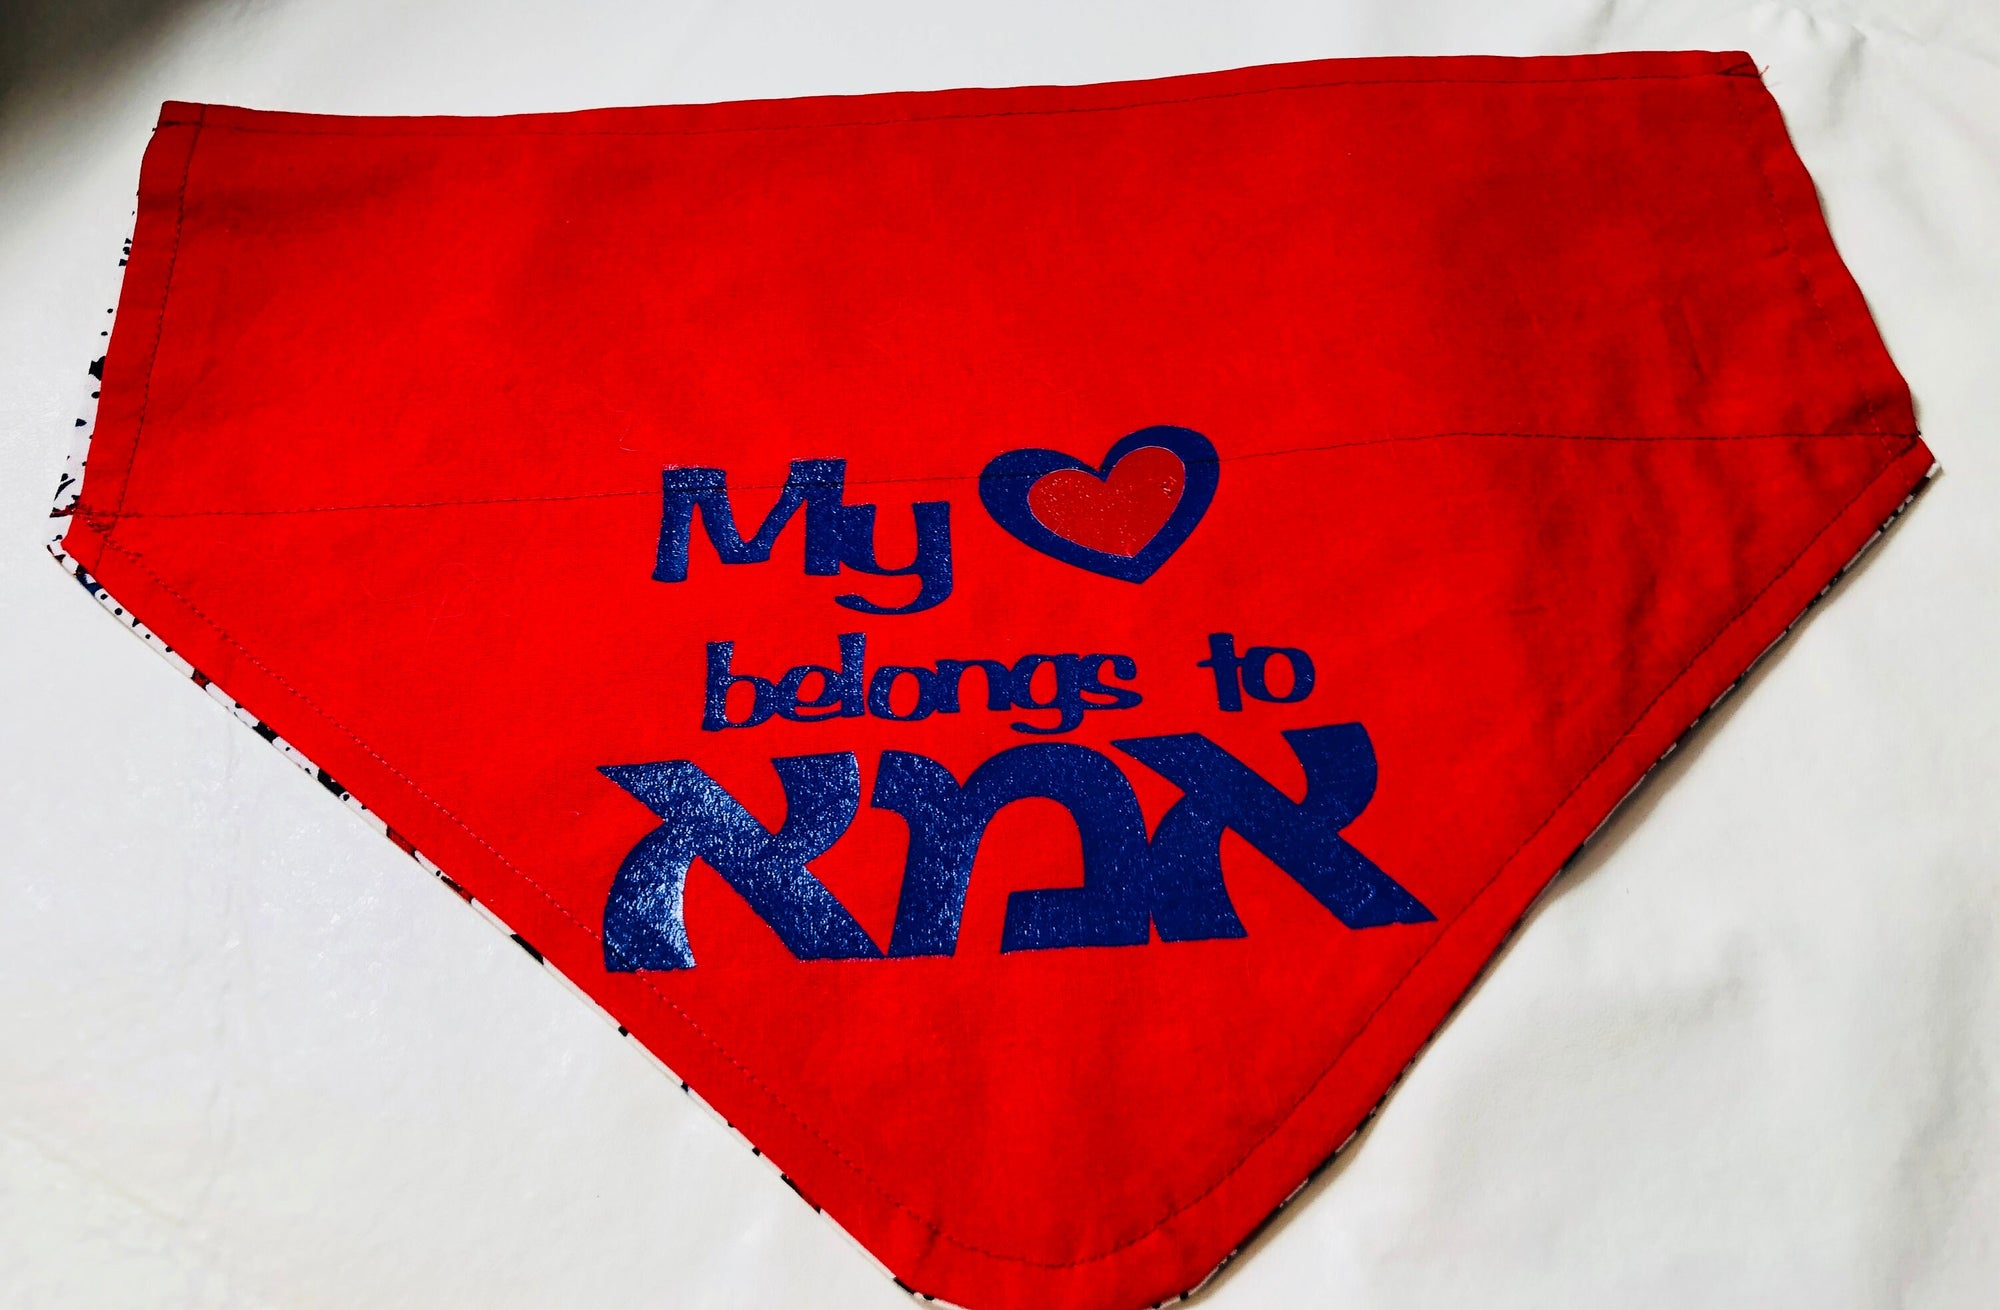 I love אמא MOM in Hebrew Reversible dog bandana  over the collar design with optional matching mask